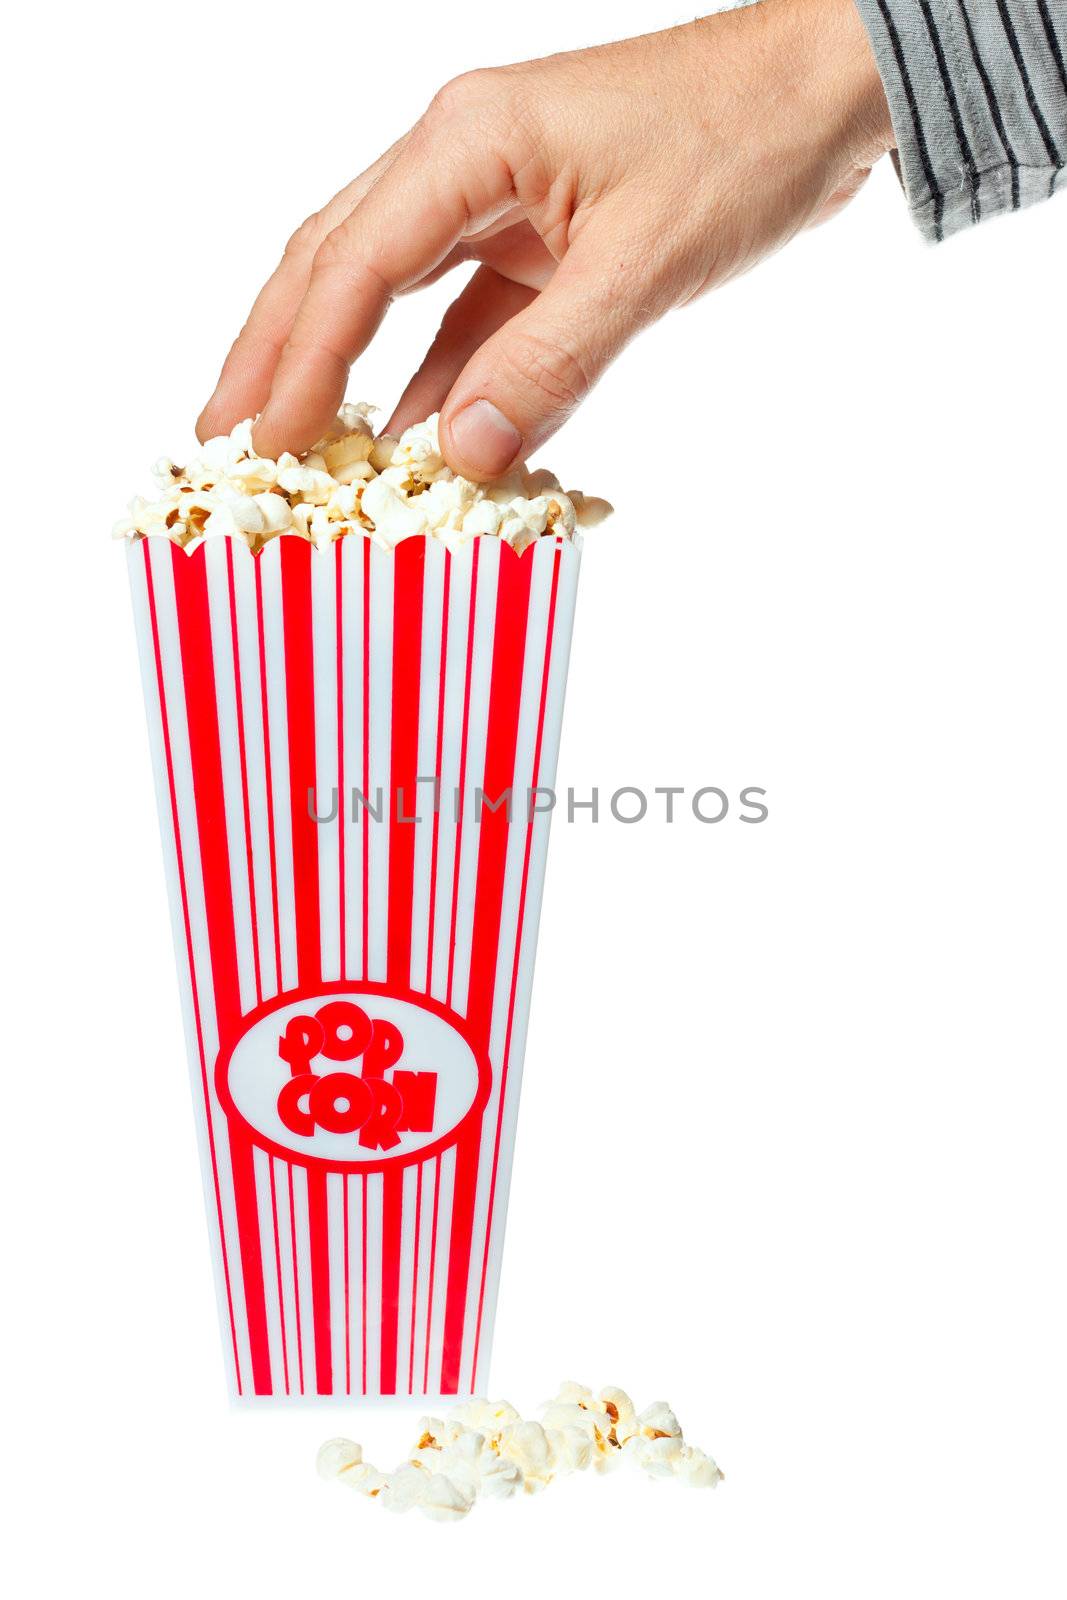 Hand grabbing popcorn out of container by Jaykayl